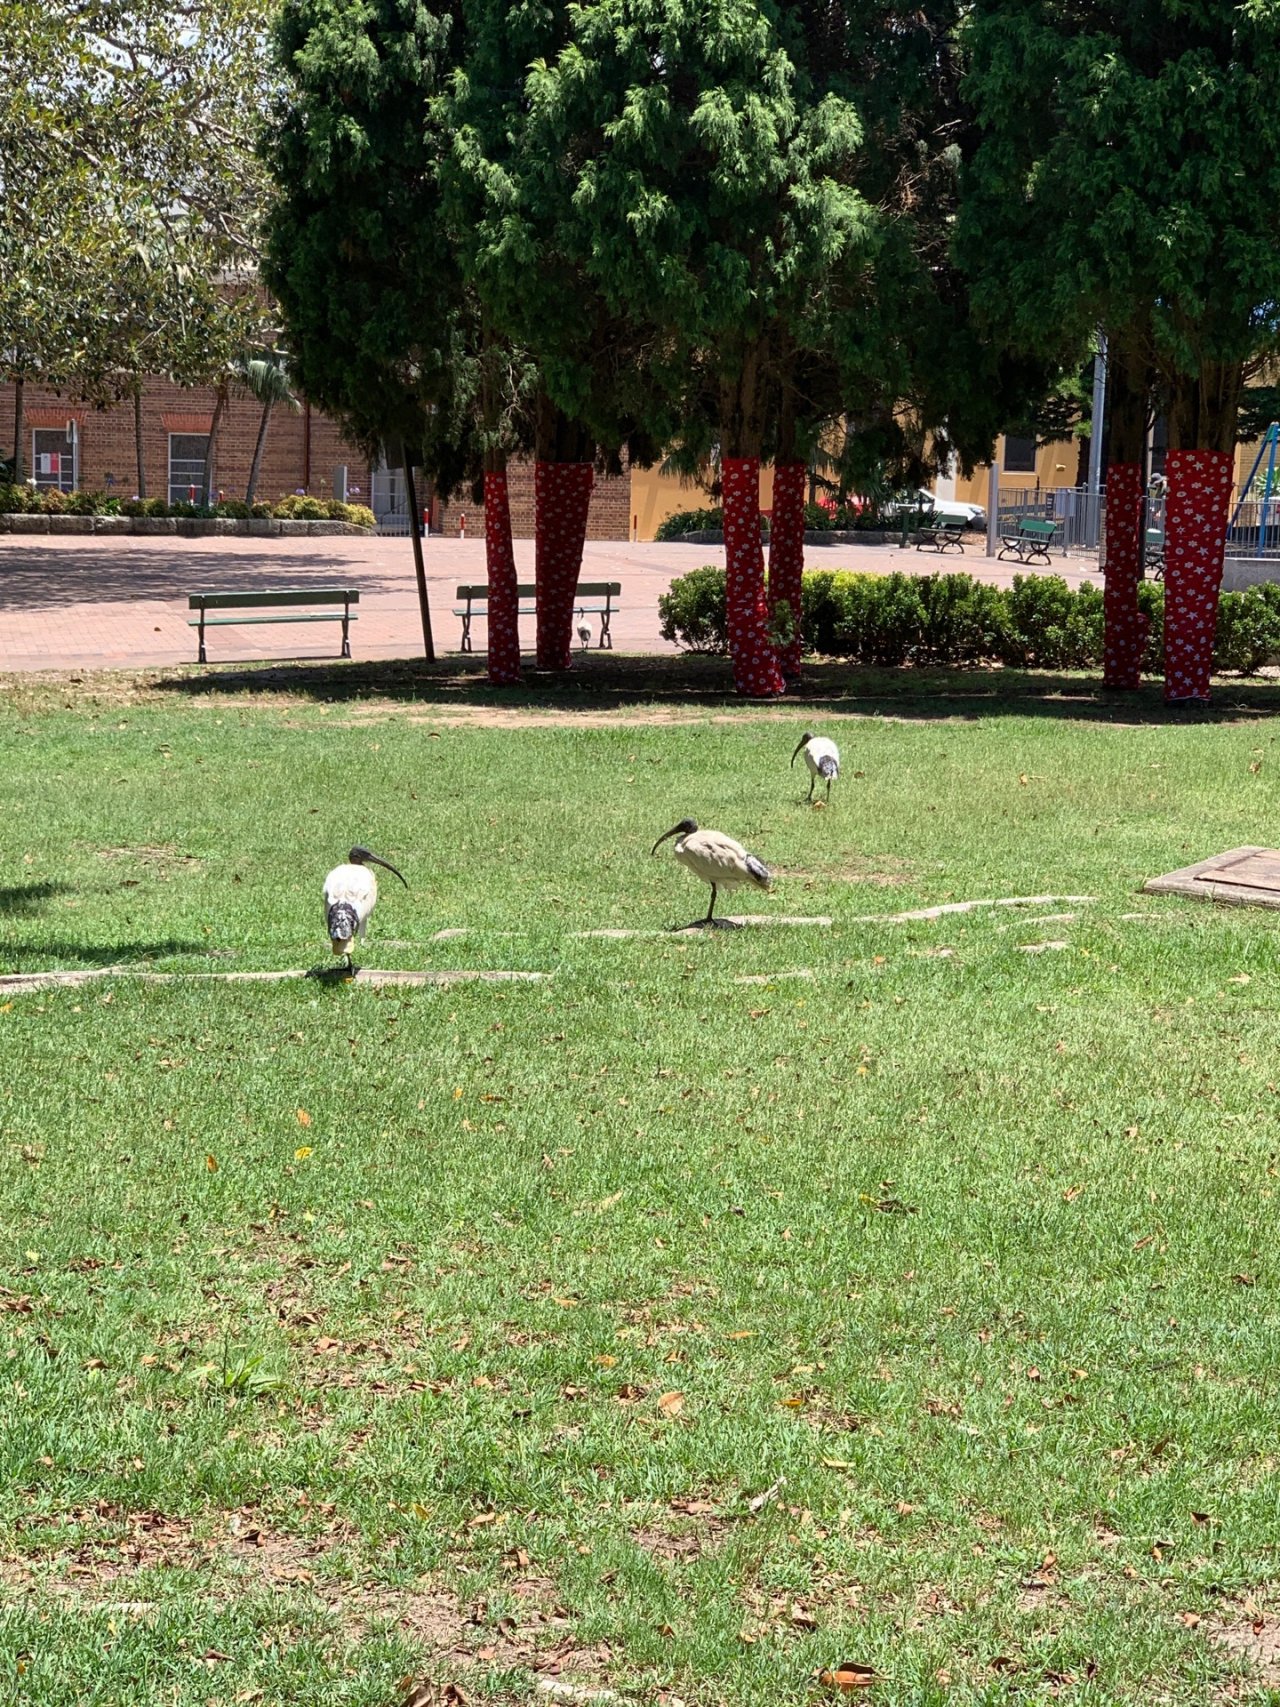 White Ibis in Big City Birds App spotted by Sean Serduk on 23.12.2020